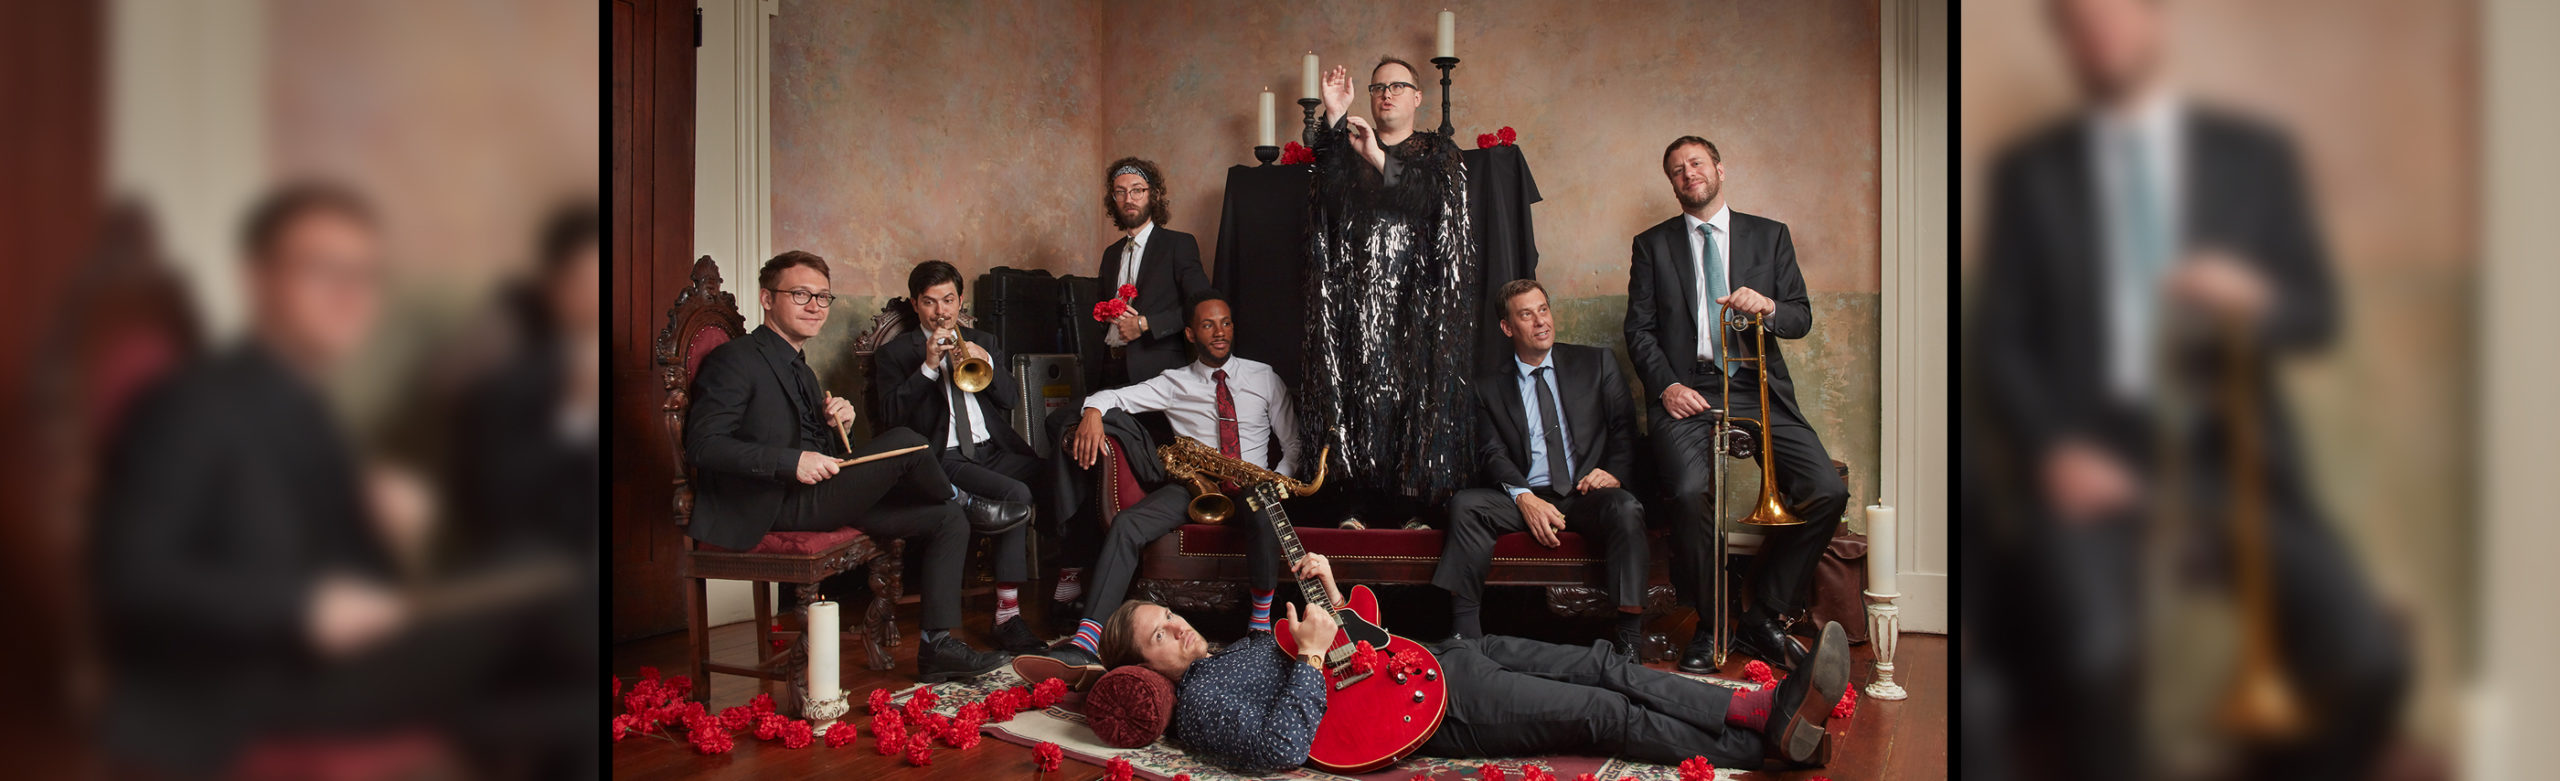 Event Info: St. Paul and the Broken Bones at the Wilma 2019 Image